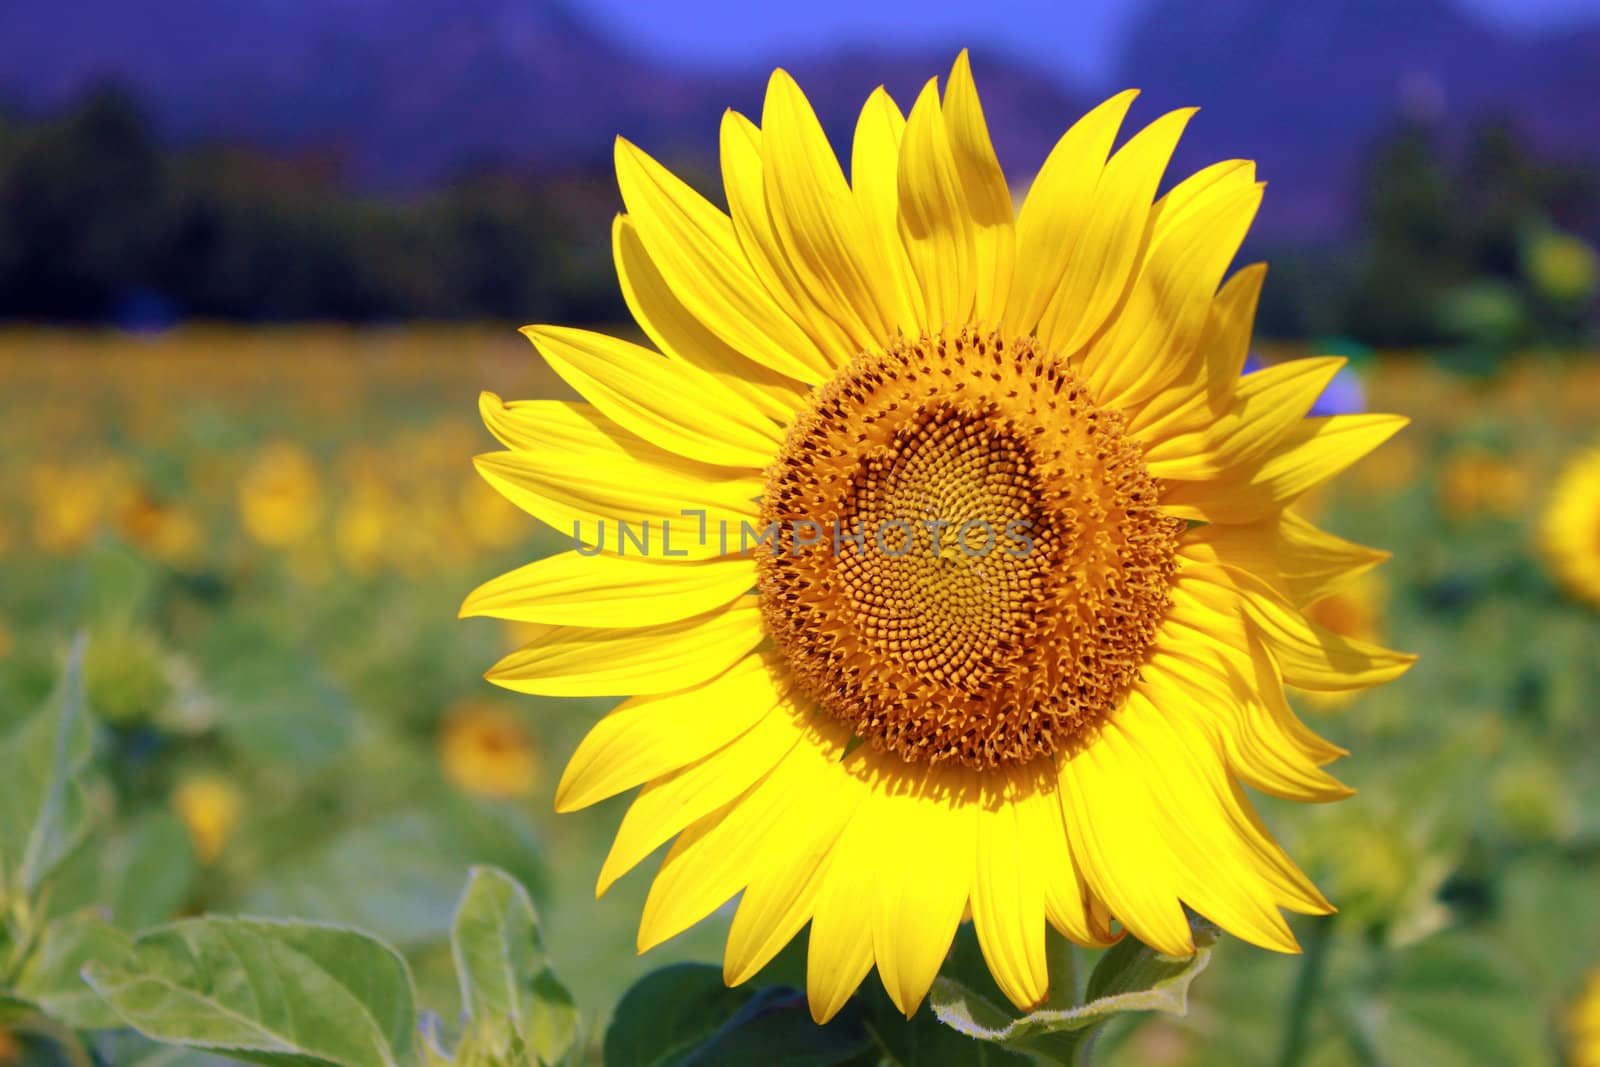 sunflowers at the field in summer by geargodz